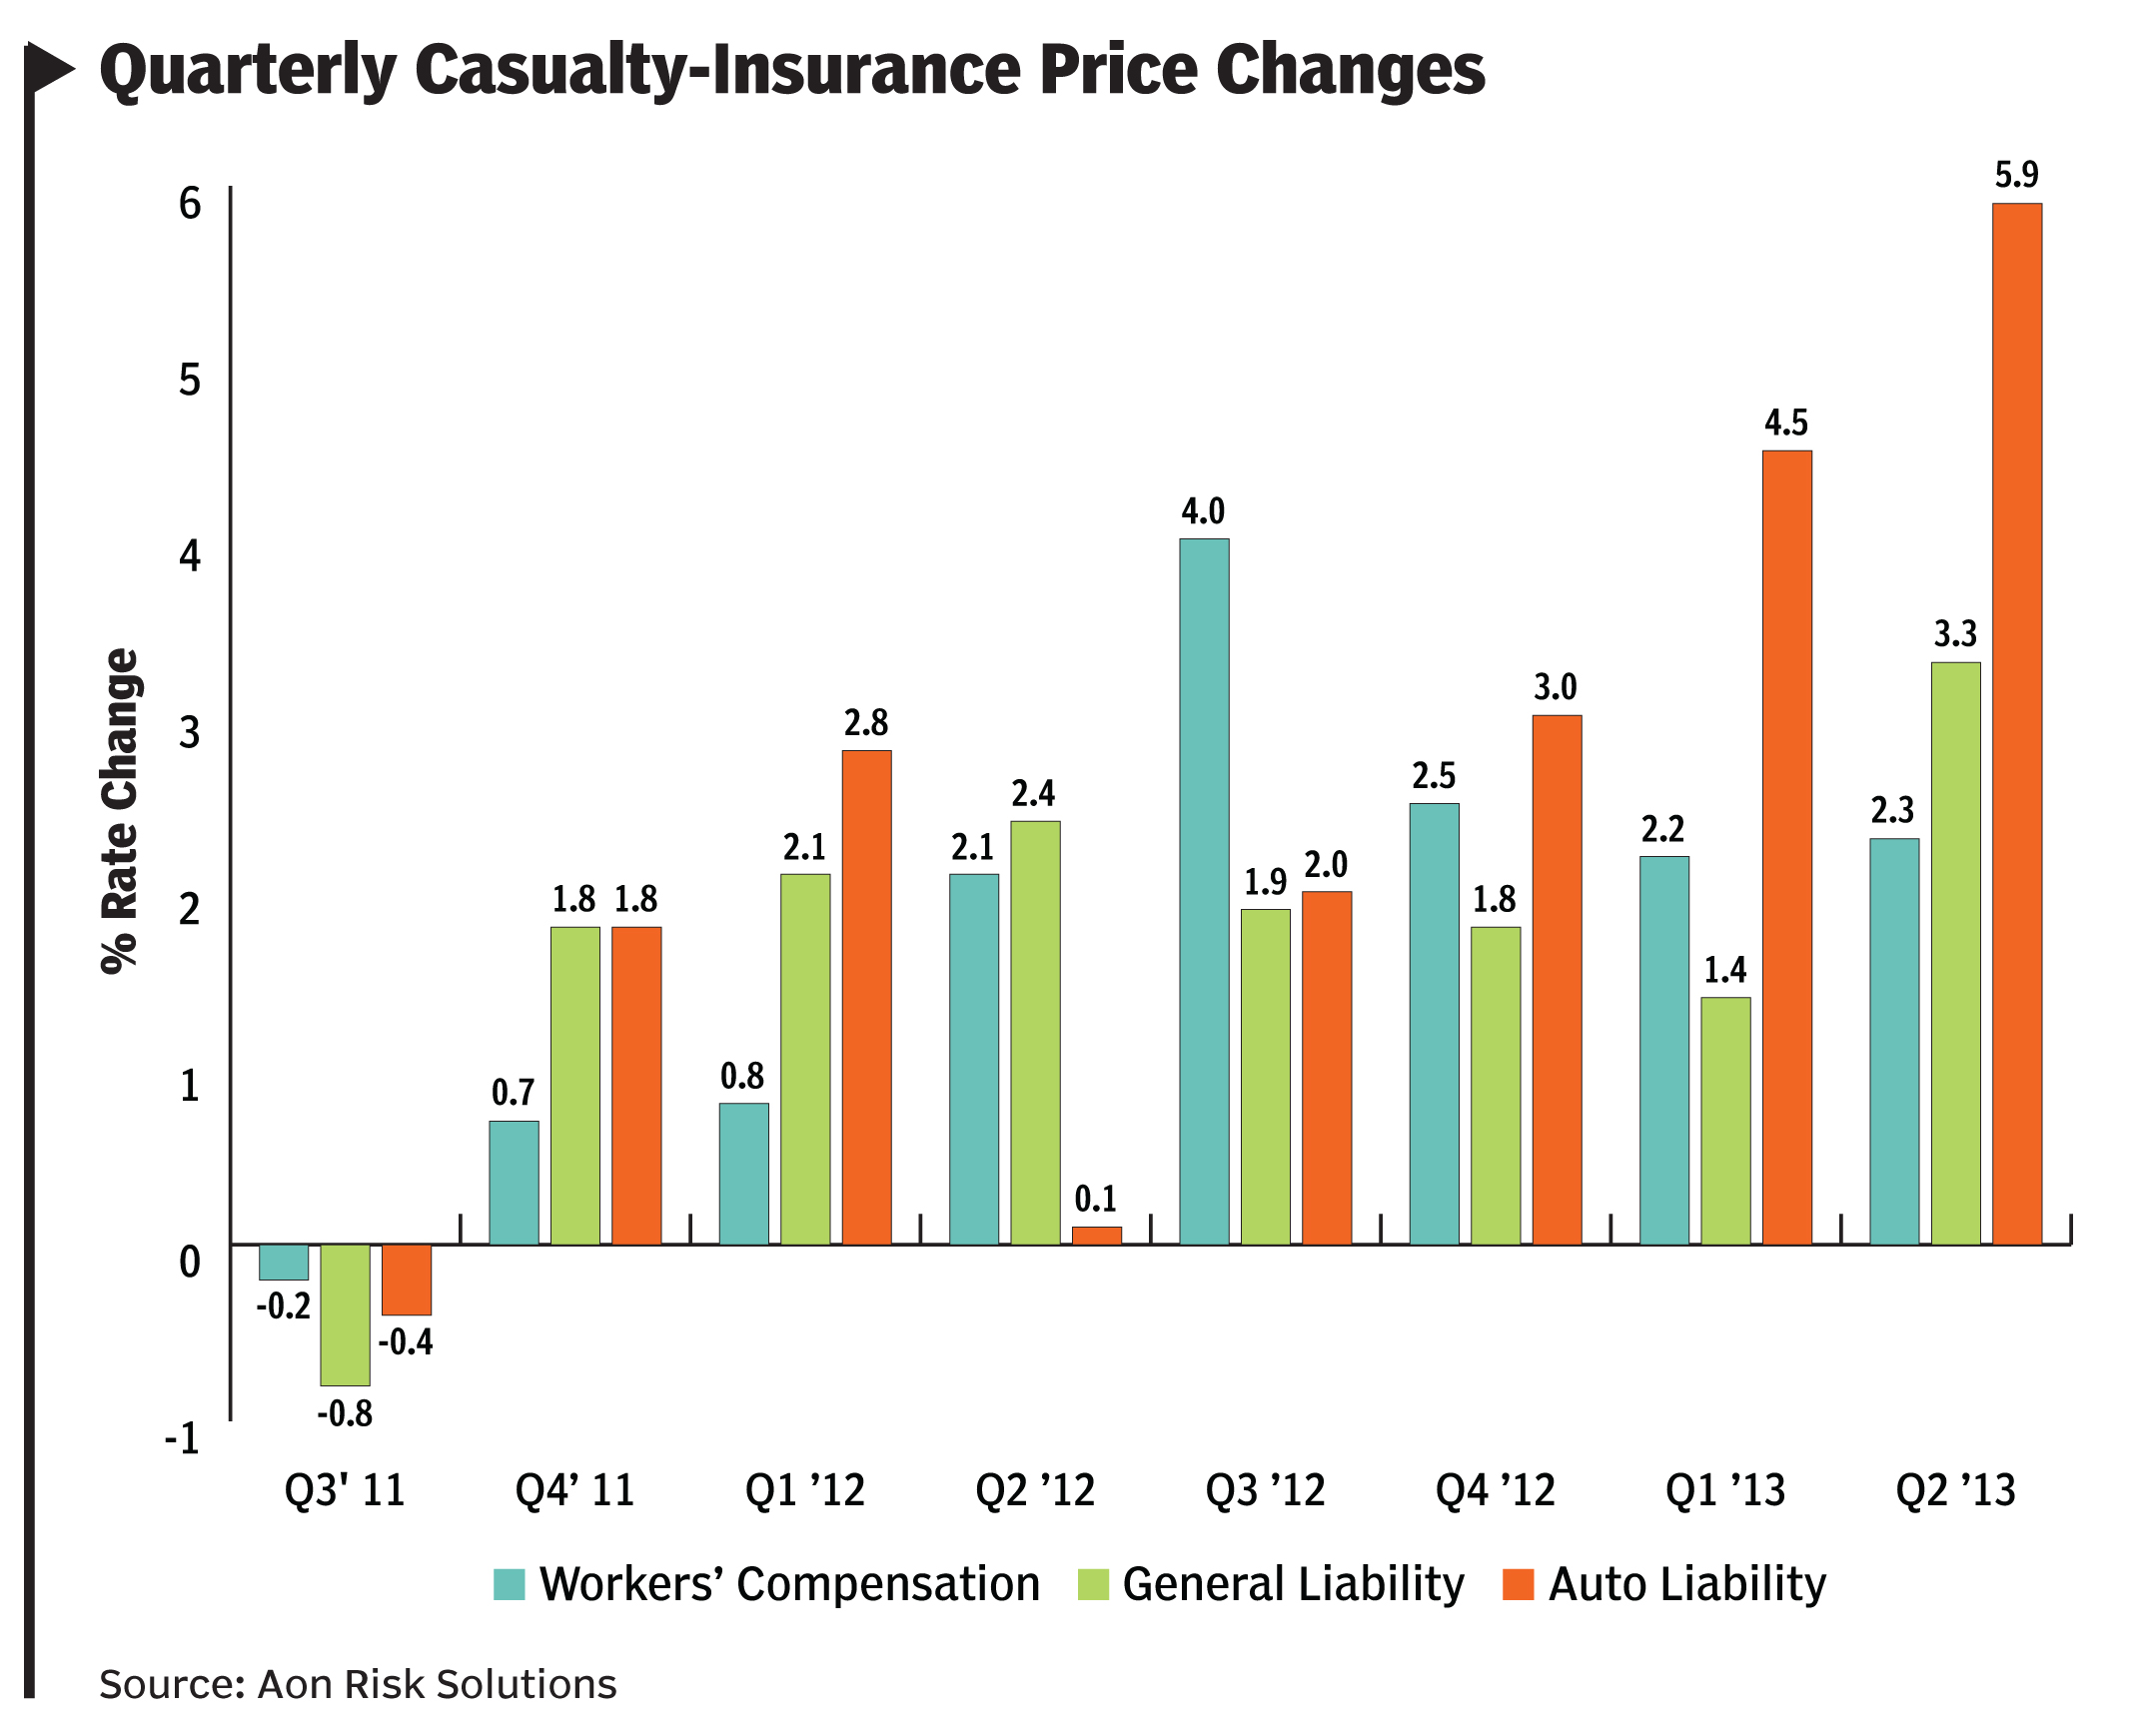 Quarterly Casualty-Insurance Price Changes